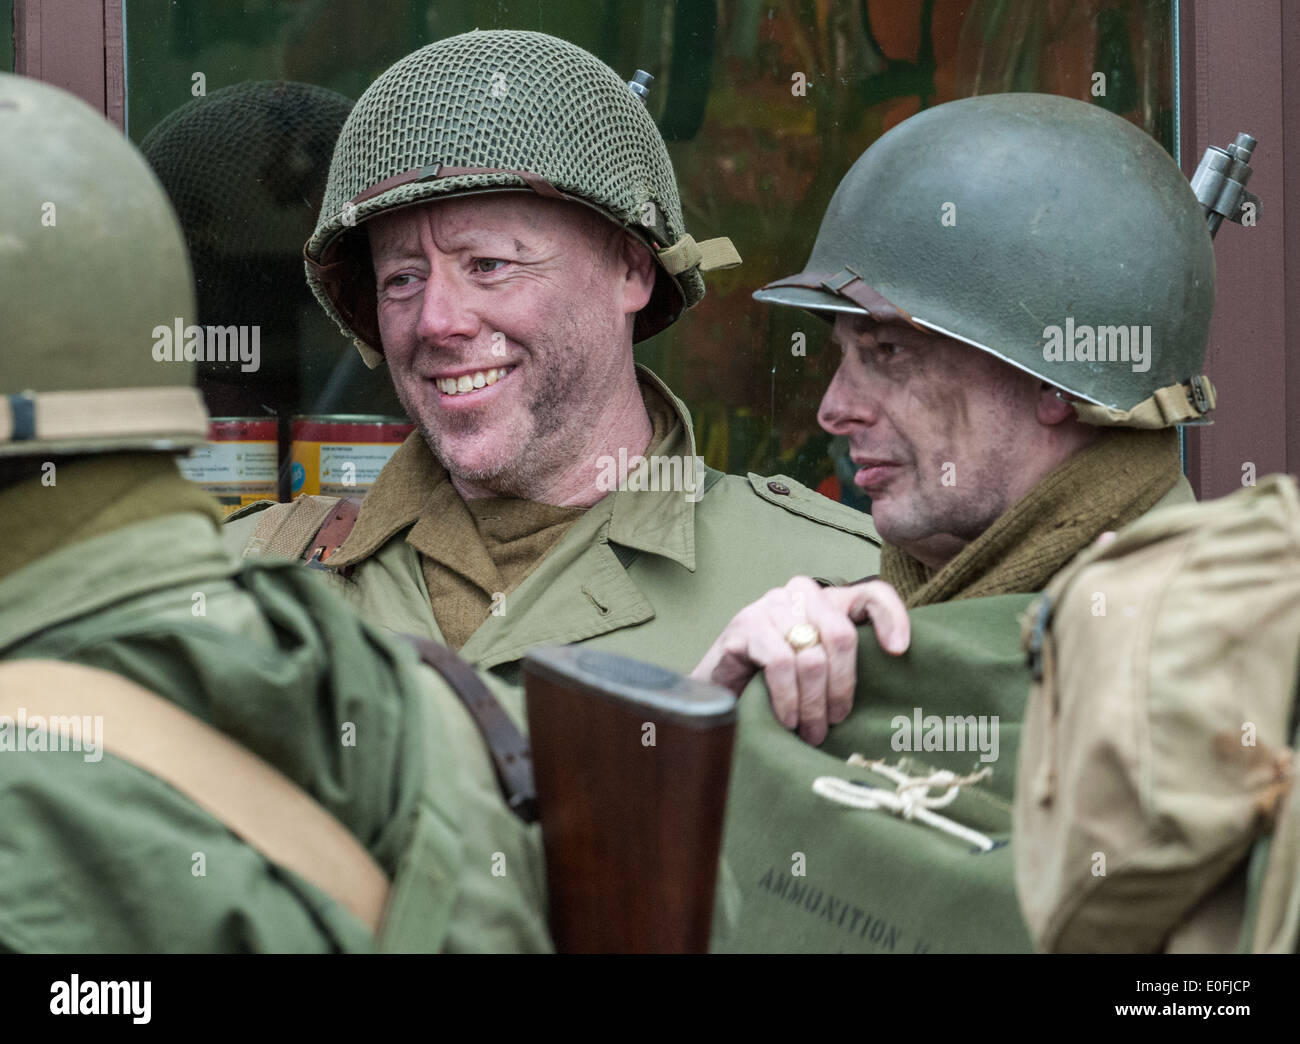 A re-enactment, or reenactment, group specialising in American GIs of World War  2 from D-Day, June 1944 to end of the war Stock Photo